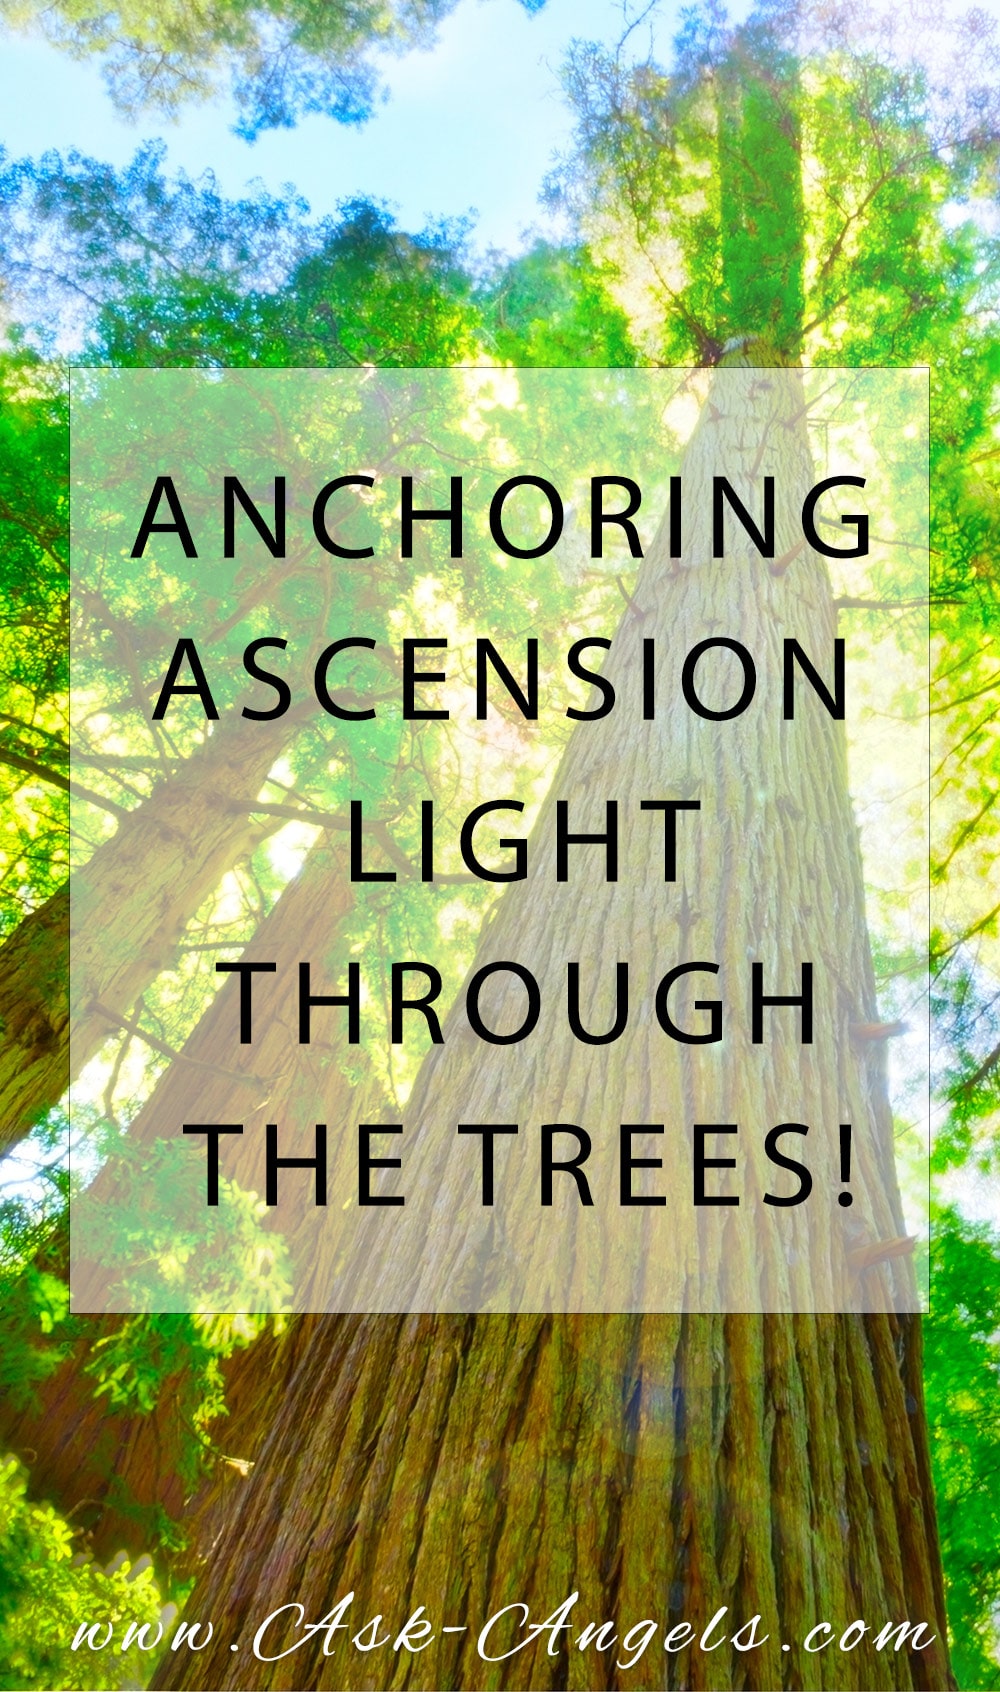 Anchoring Ascension Light Through The Trees